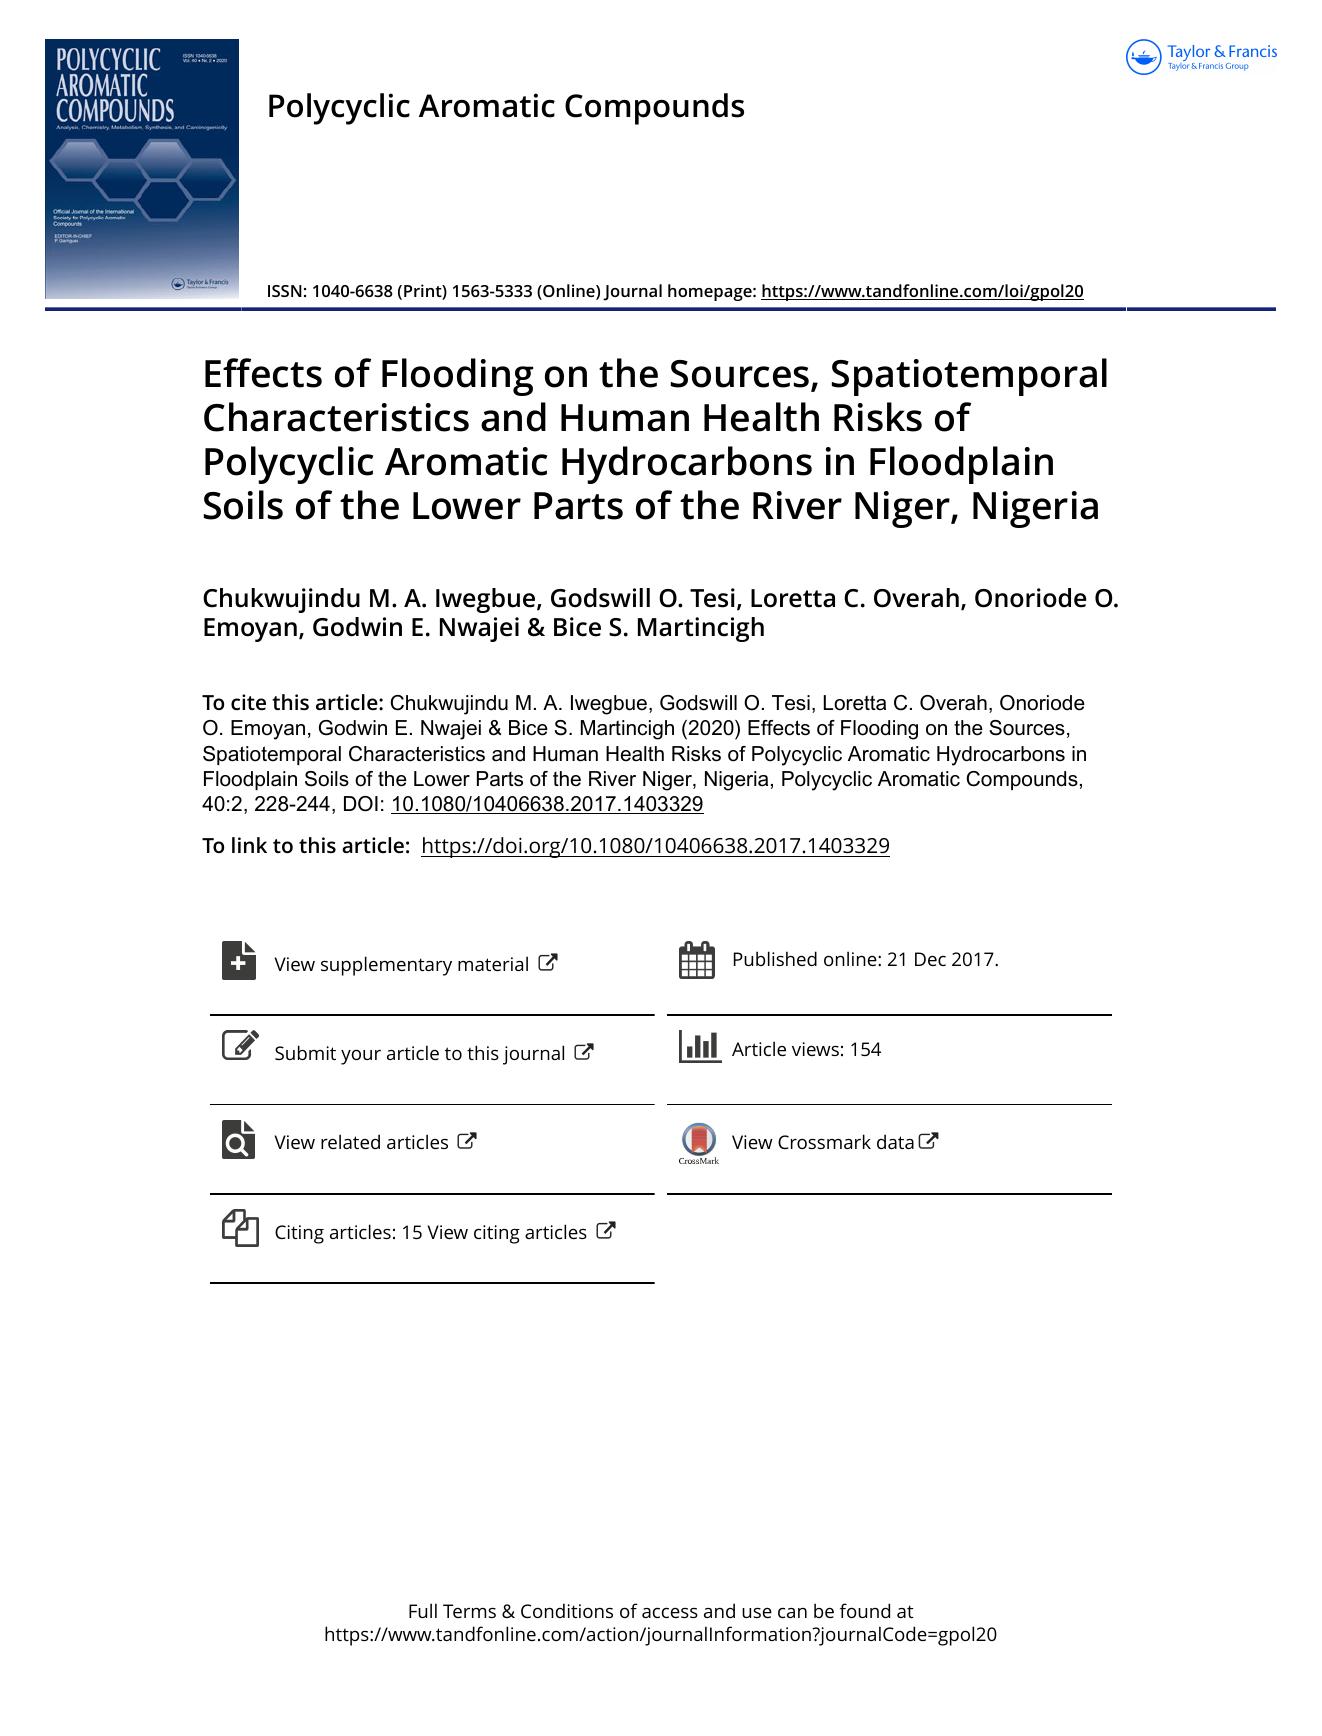 Effects of Flooding on the Sources, Spatiotemporal Characteristics and Human Health Risks of Polycyclic Aromatic Hydrocarbons in Floodplain Soils of the Lower Parts of the River Niger, Nigeria by unknow